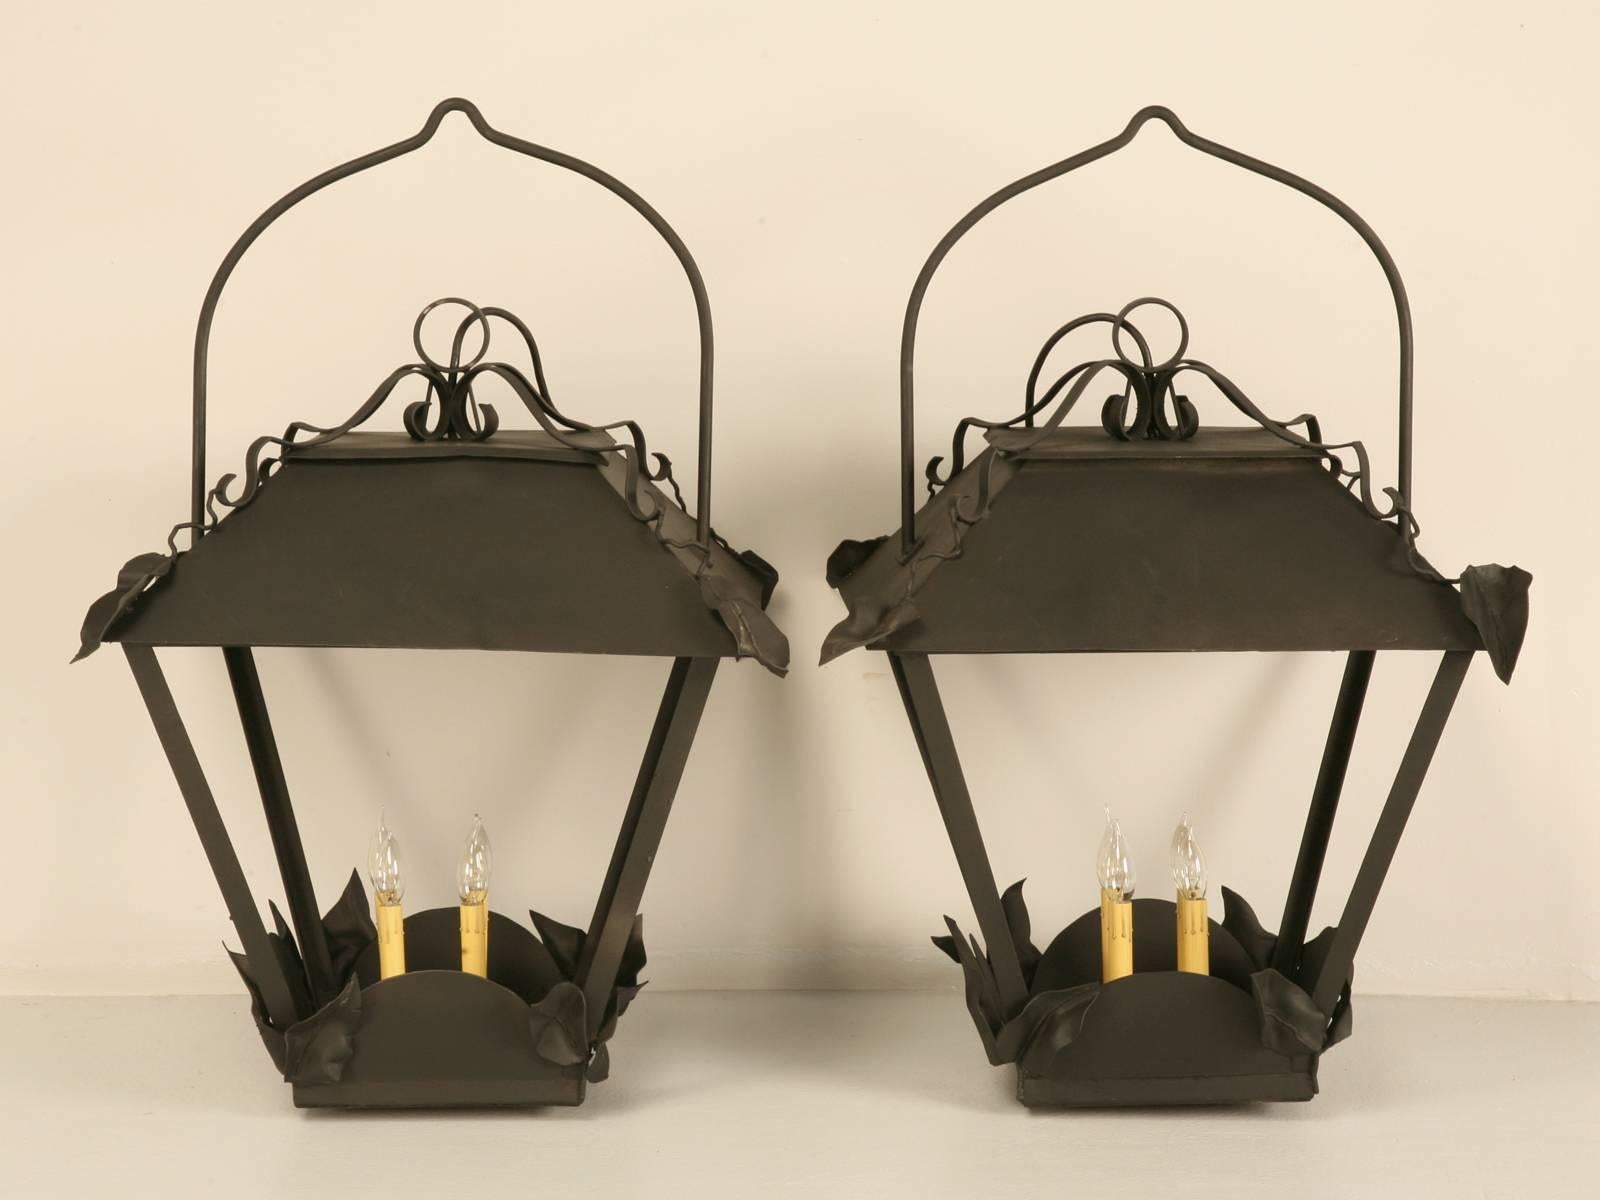 Matched pair of large-scale French lanterns probably dating from the 1950s. They are unusually large and we have never seen this style before with the leaves decorating the top section. Our shop rewired the lanterns and installed USA sockets and